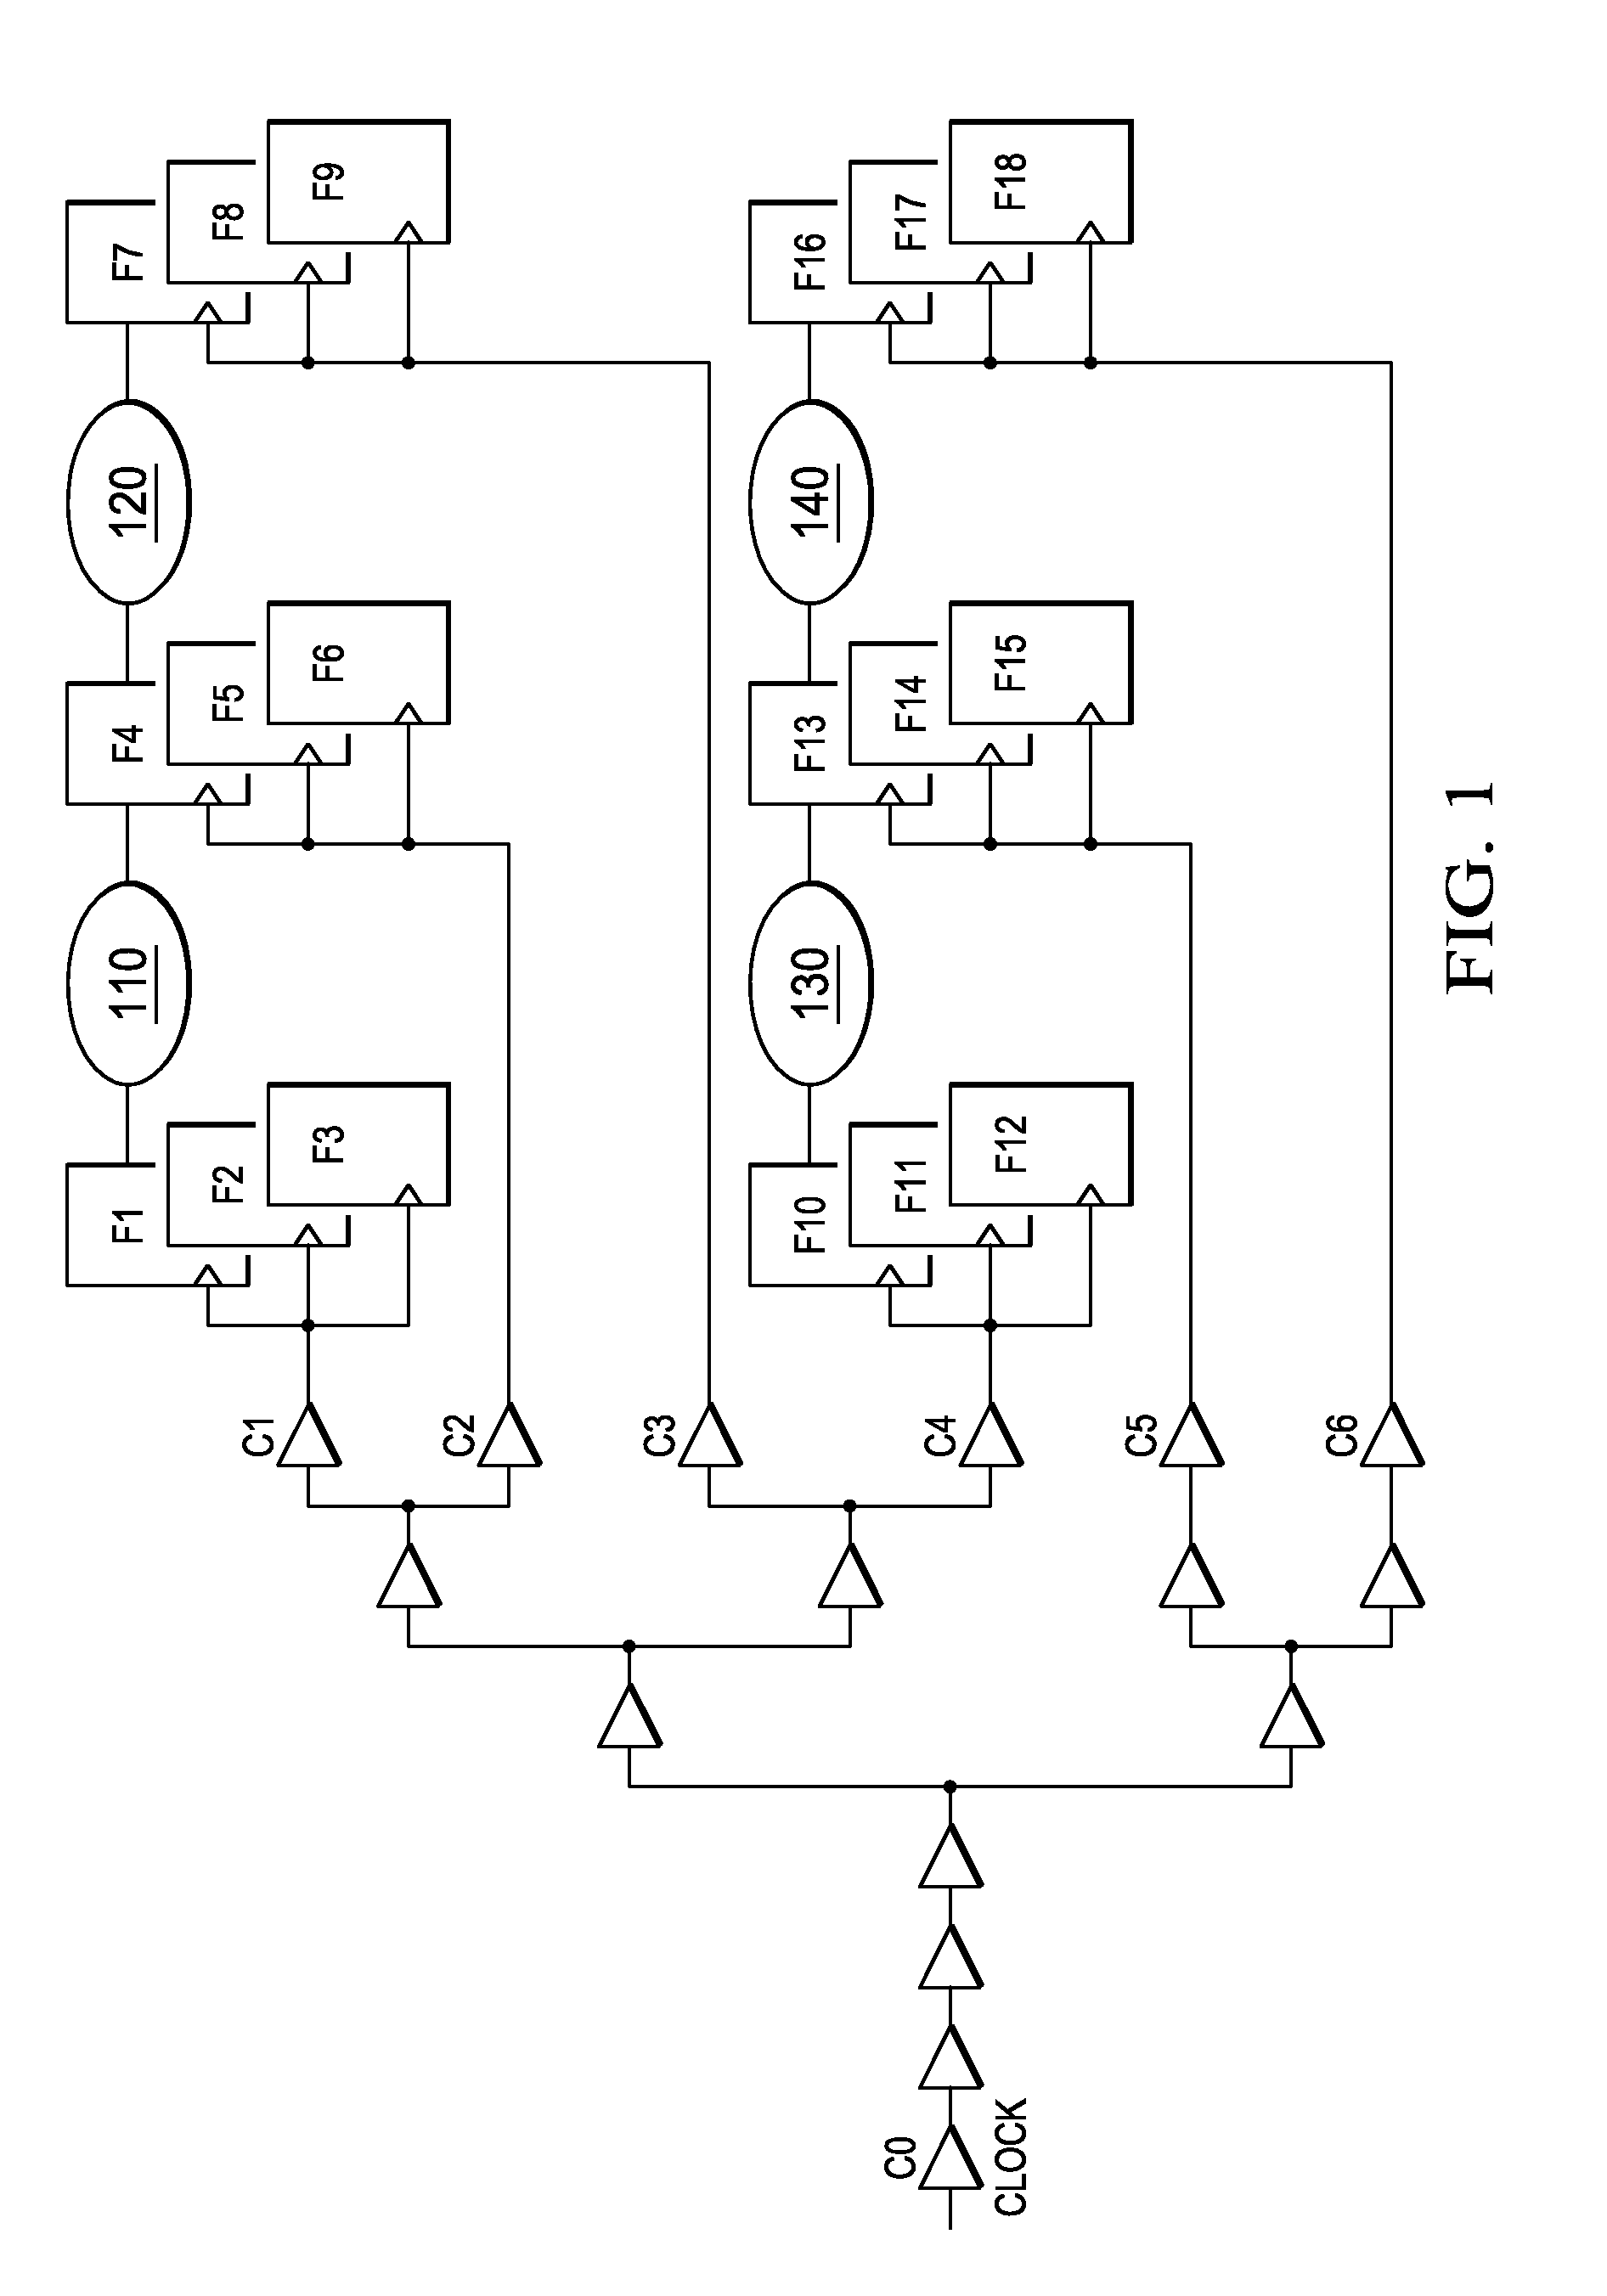 System and method for clock optimization to achieve timing signoff in an electronic circuit and electronic design automation tool incorporating the same